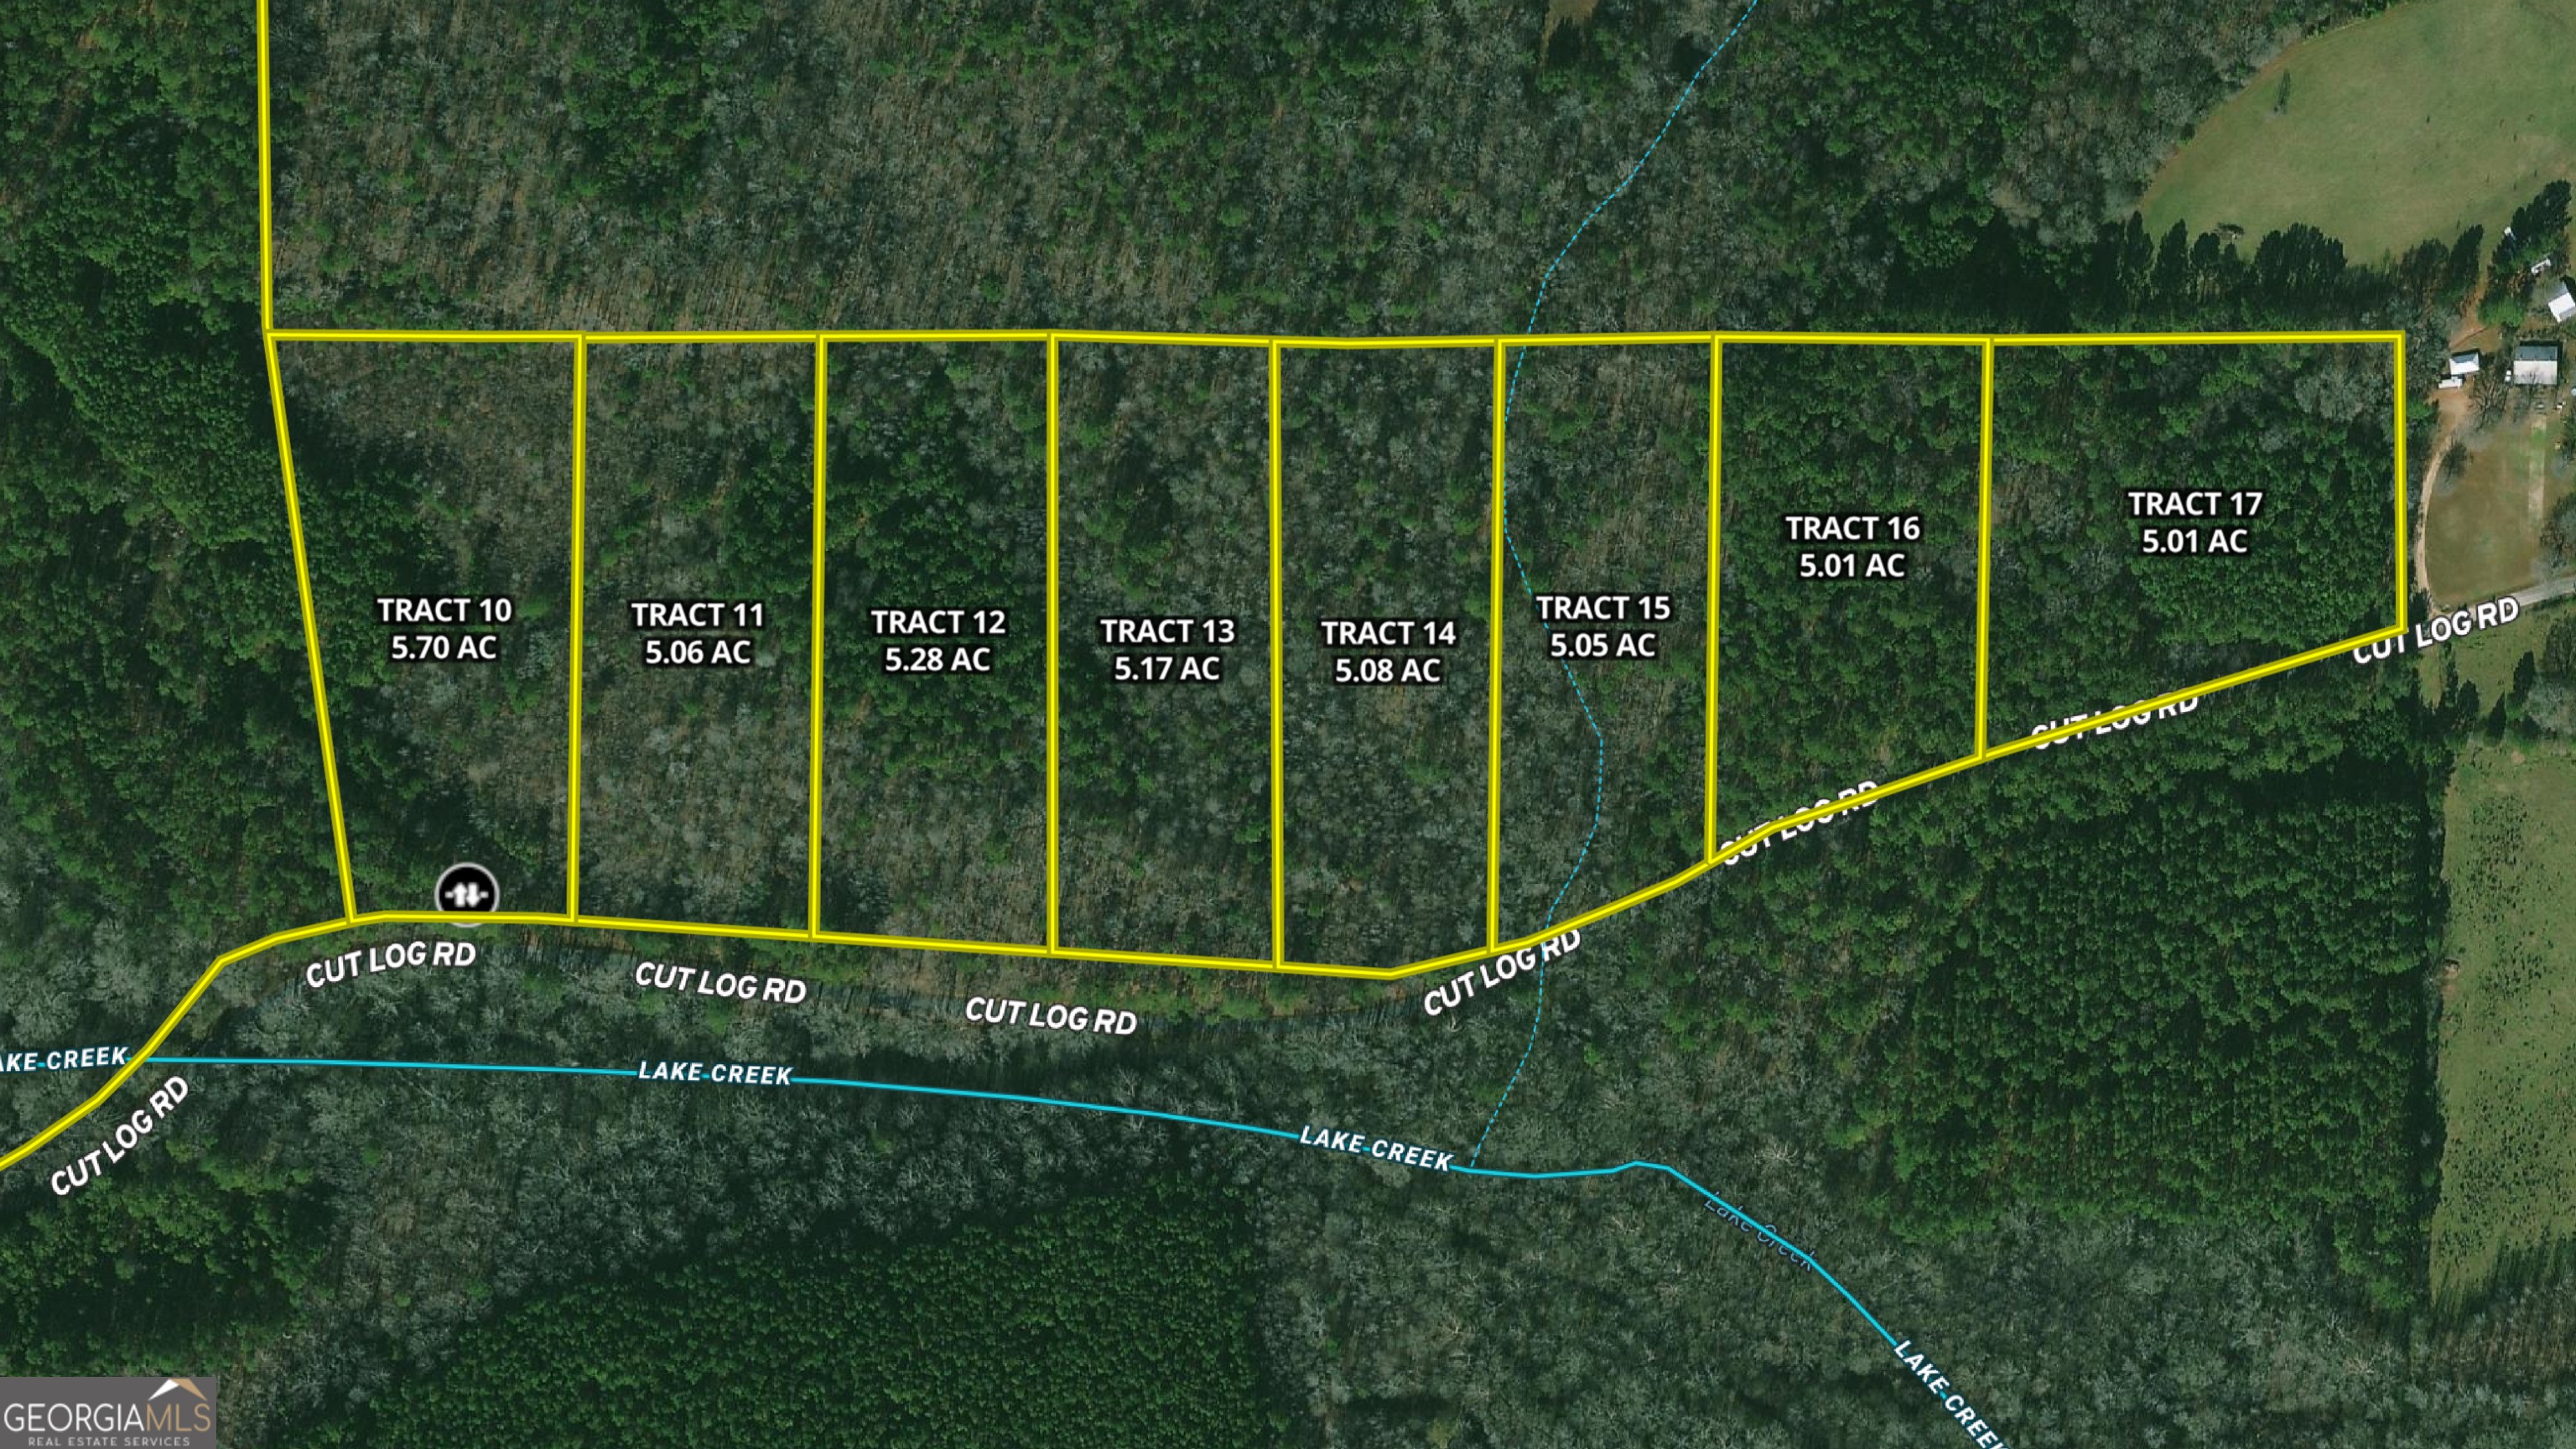 2. 5.017 Acres On Cut Log Road, Tract 16